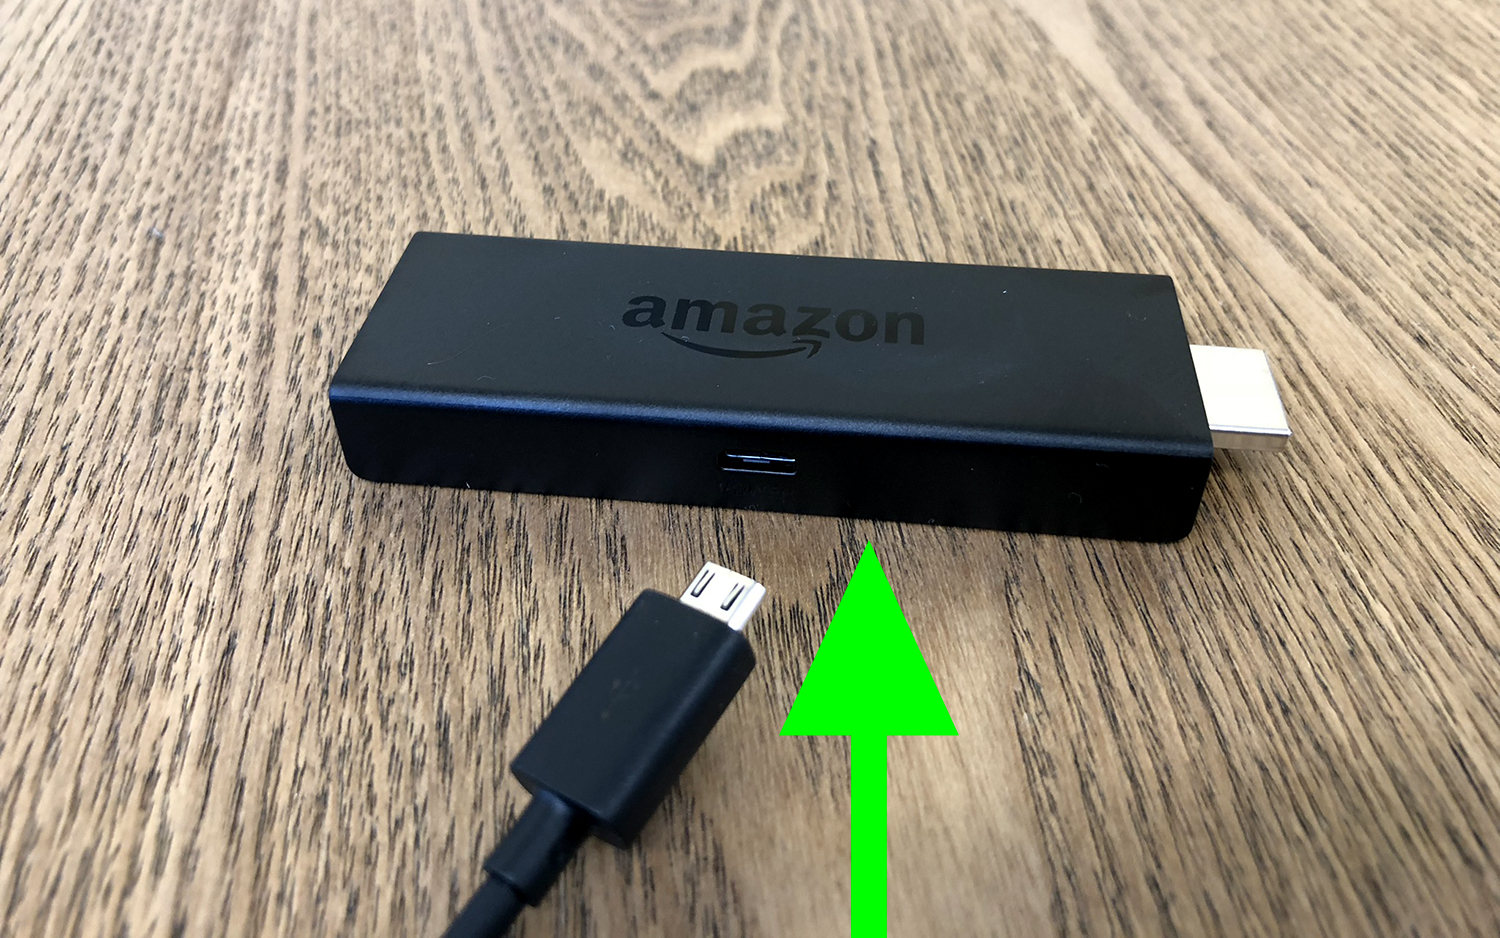 The Fire TV Stick and the USB power cord going into it